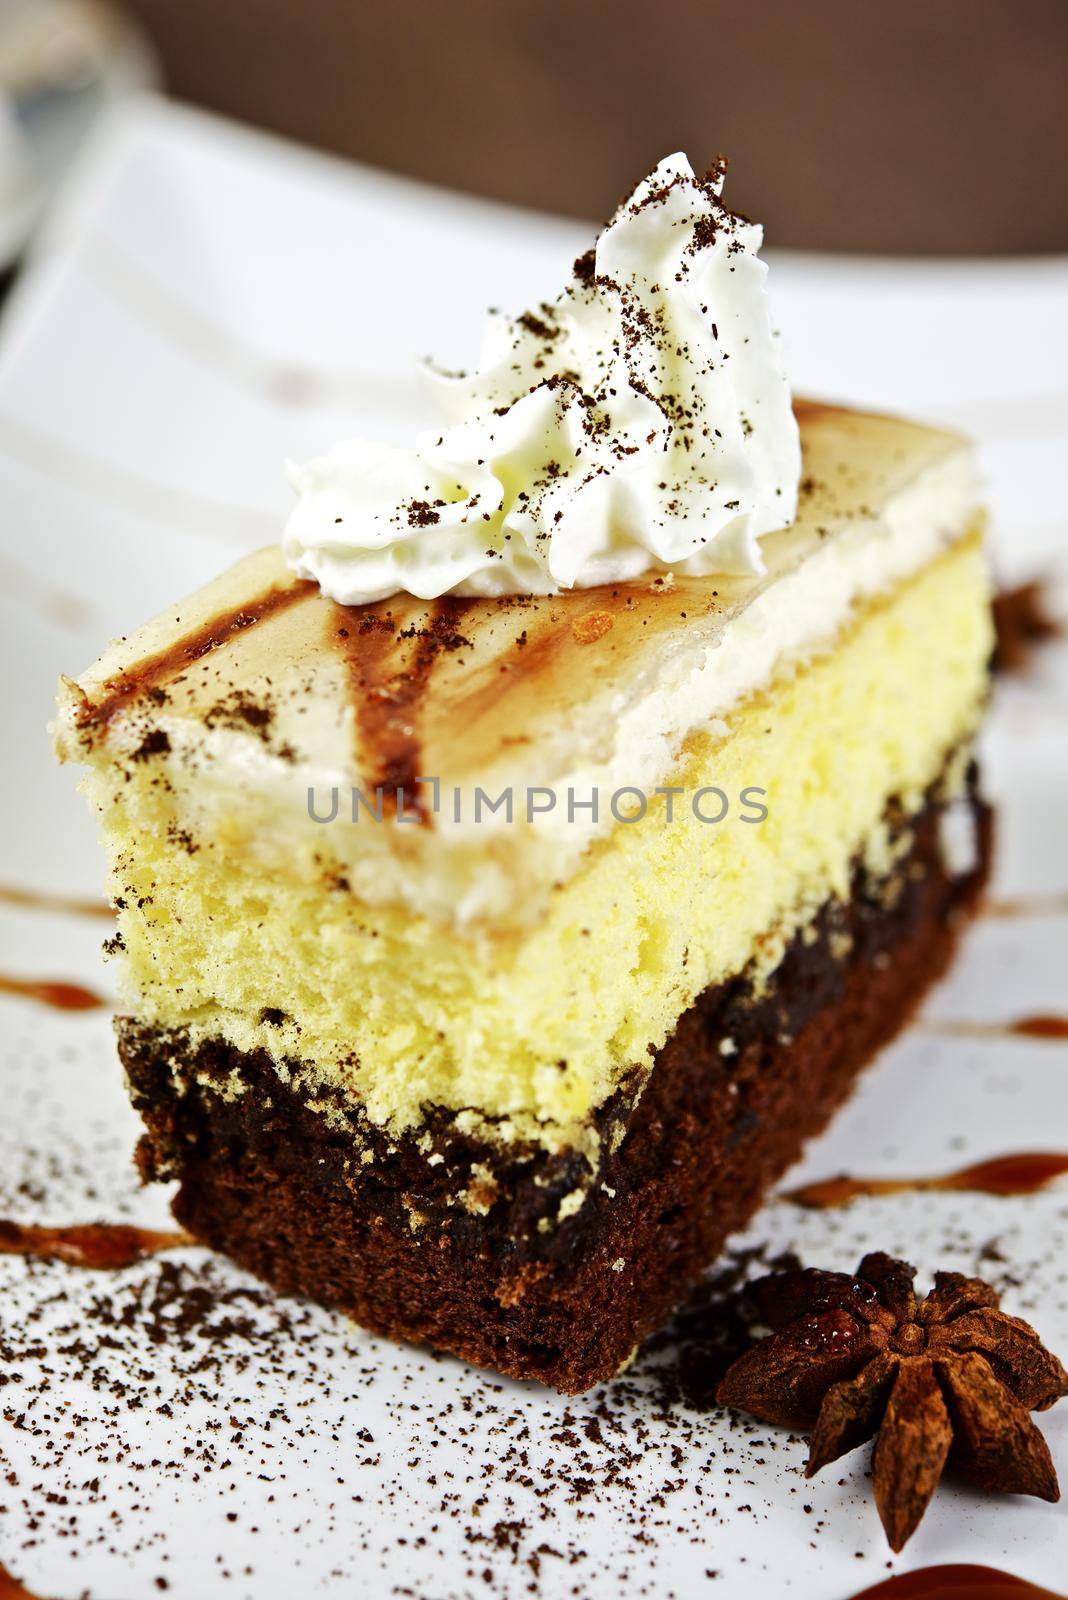 Cake Piece with Cream on Top. Delicious Cake Vertical Closeup Photography. Food Photo Collection. by welcomia